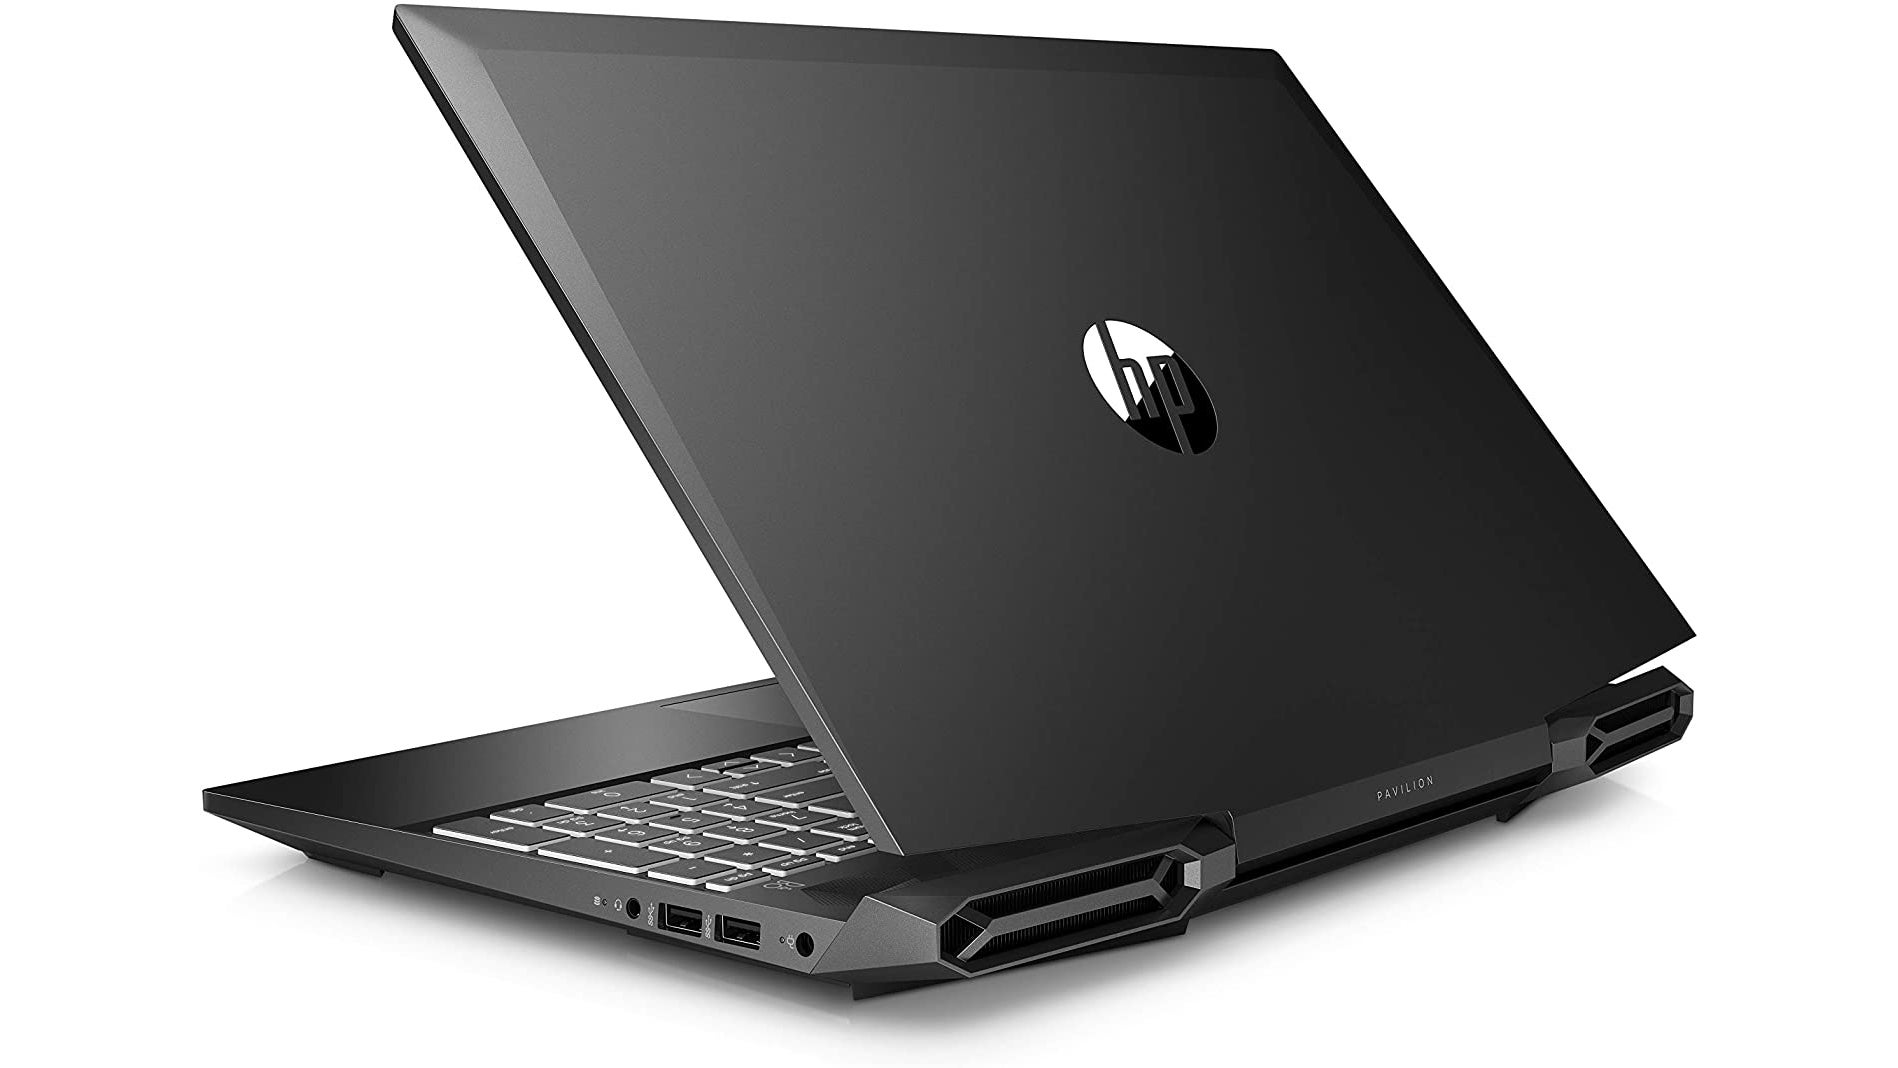 a photo of a gaming laptop, specifically the hp pavilion 15